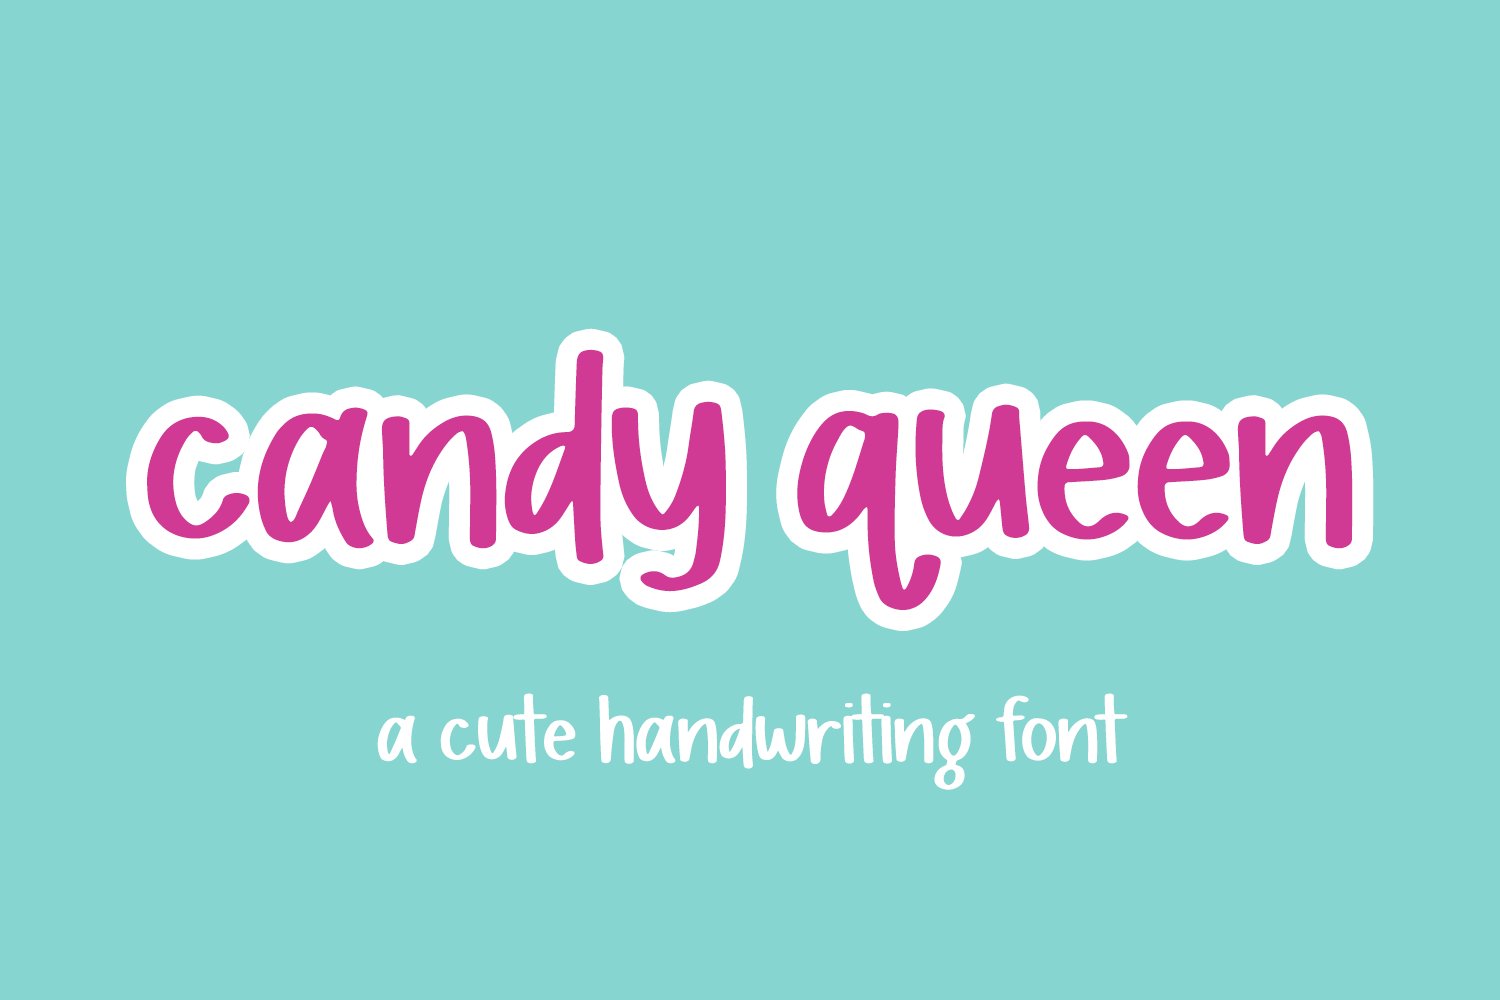 Candy Queen Sans cover image.